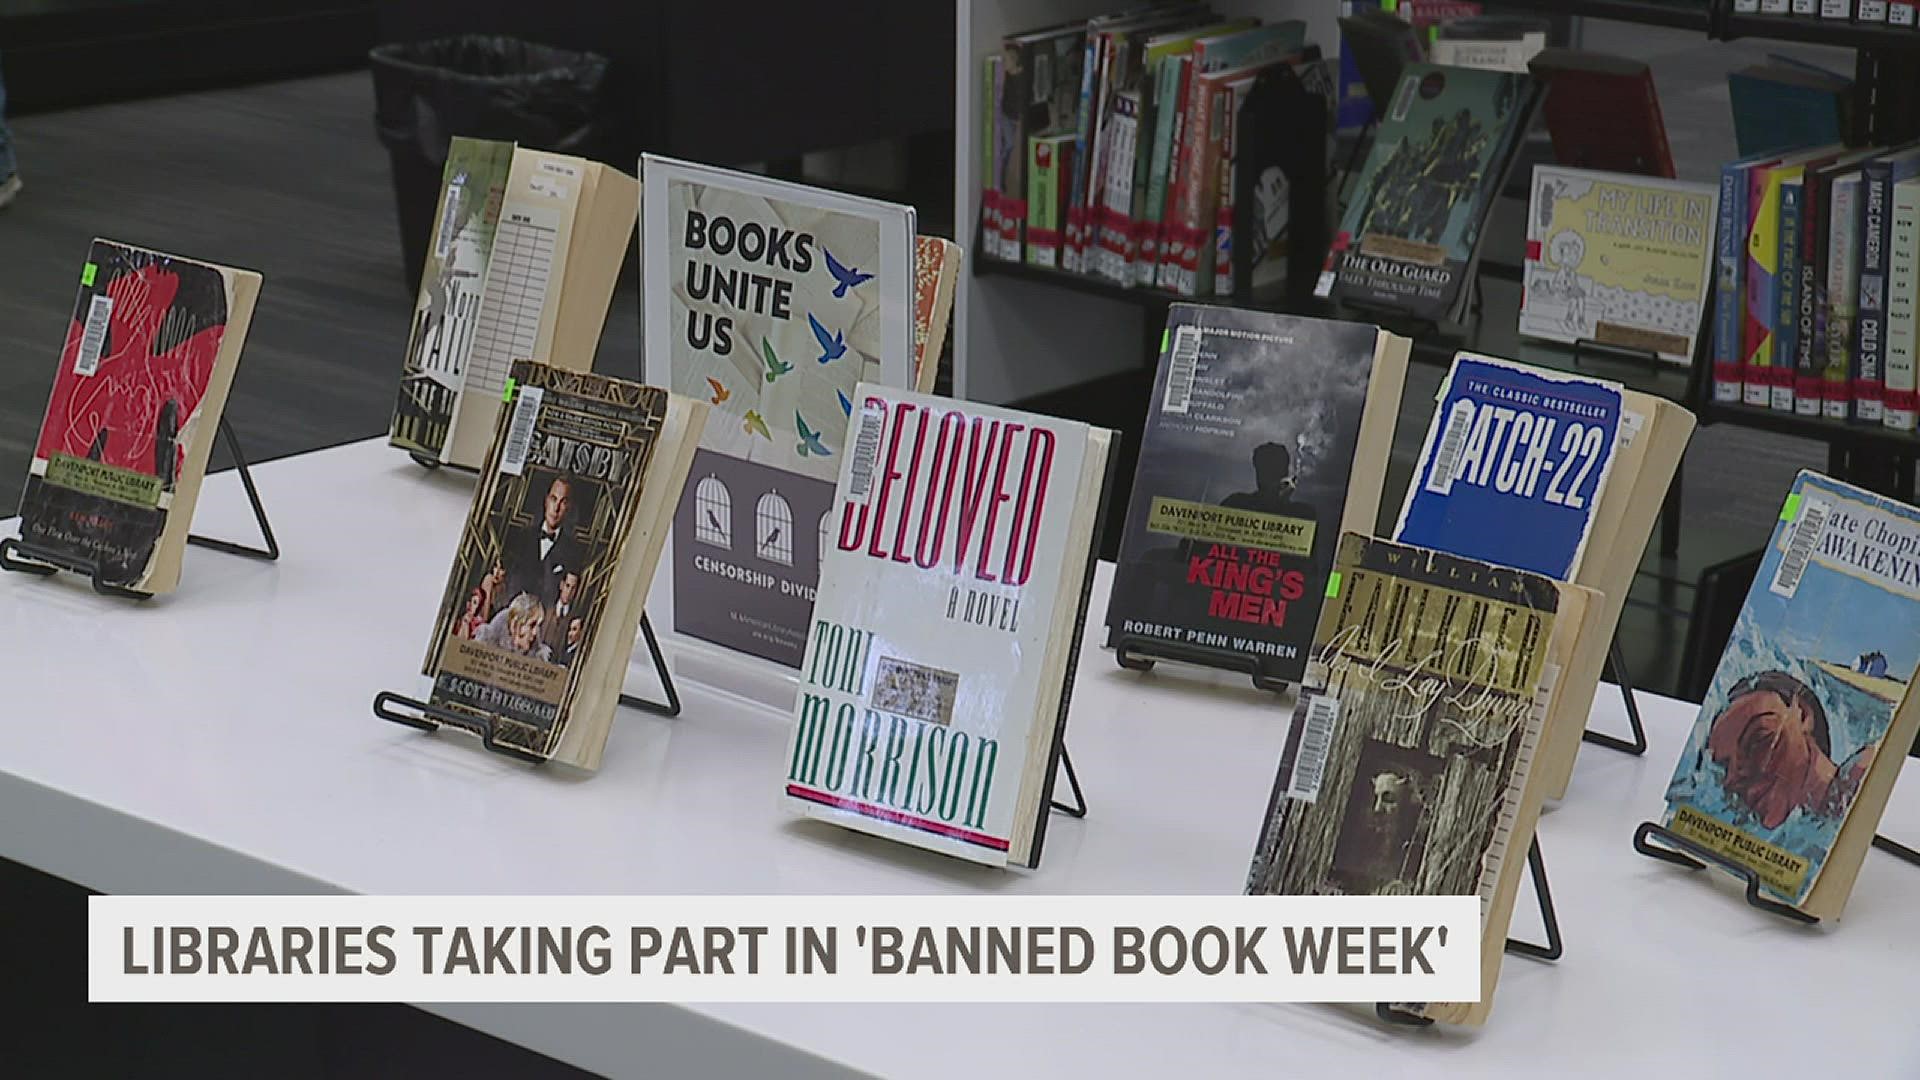 The library is participating in the American Library Association's Banned Books Week to celebrate books that are under the threat of censorship.